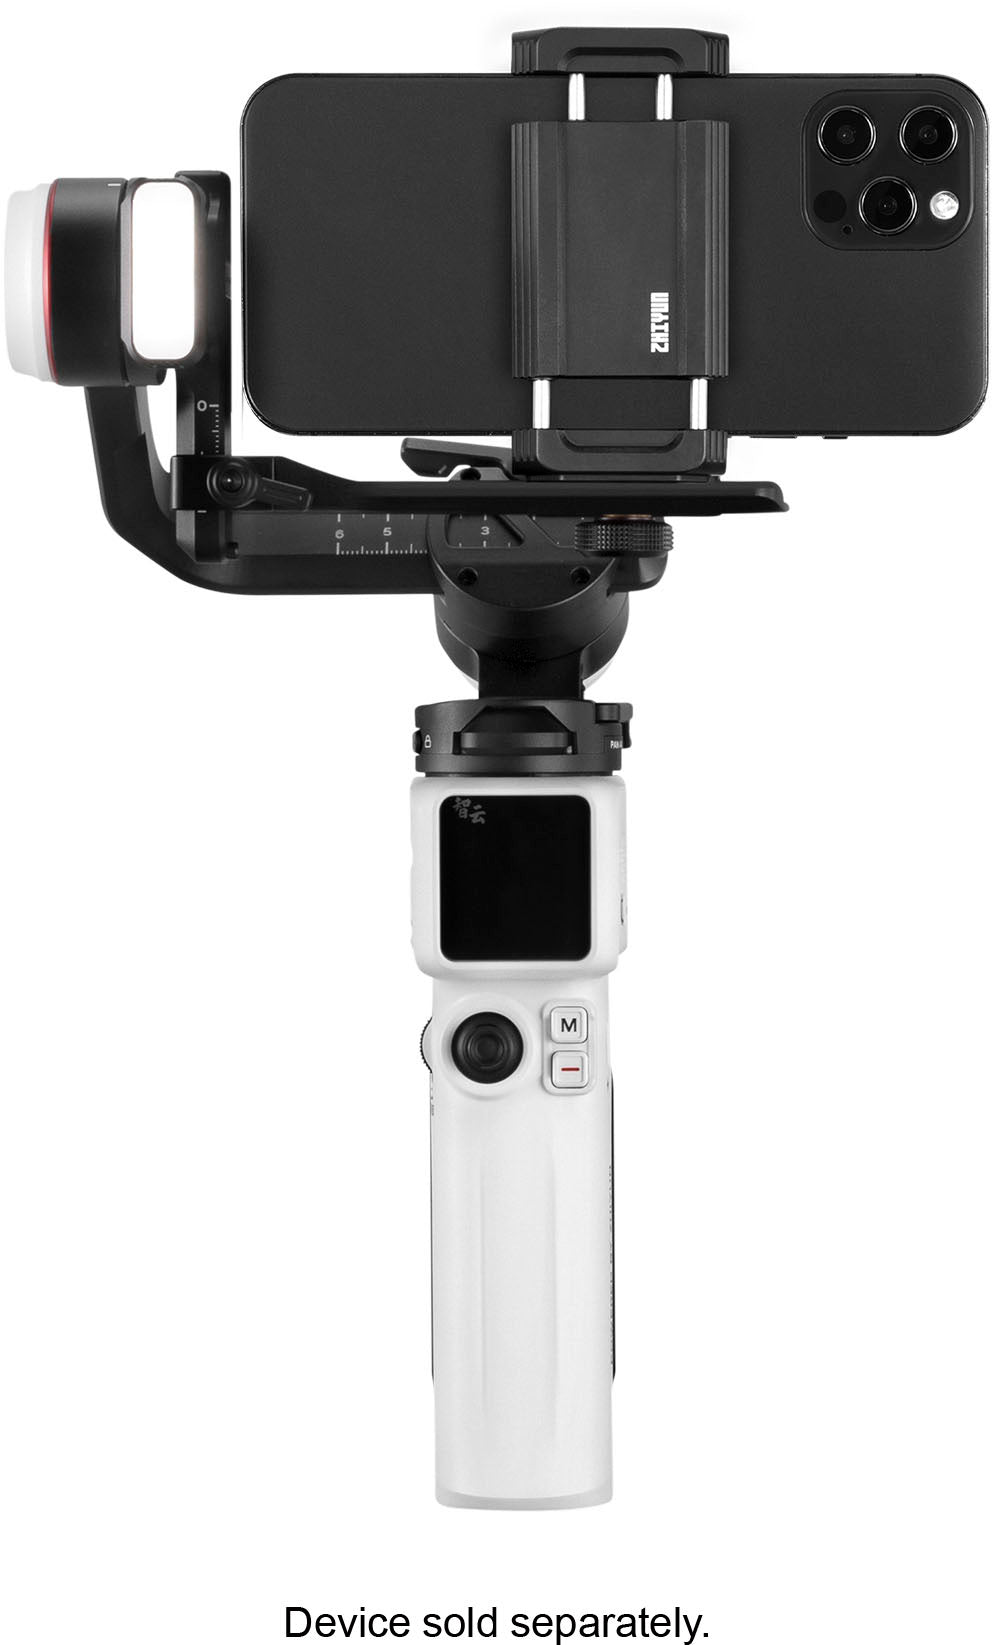 Zhiyun - Crane-M 3S 3-Axis Gimbal Stabilizer Standard for Smartphones, Action or Mirrorless Cameras w/ detachable tri-pod stand - White_1